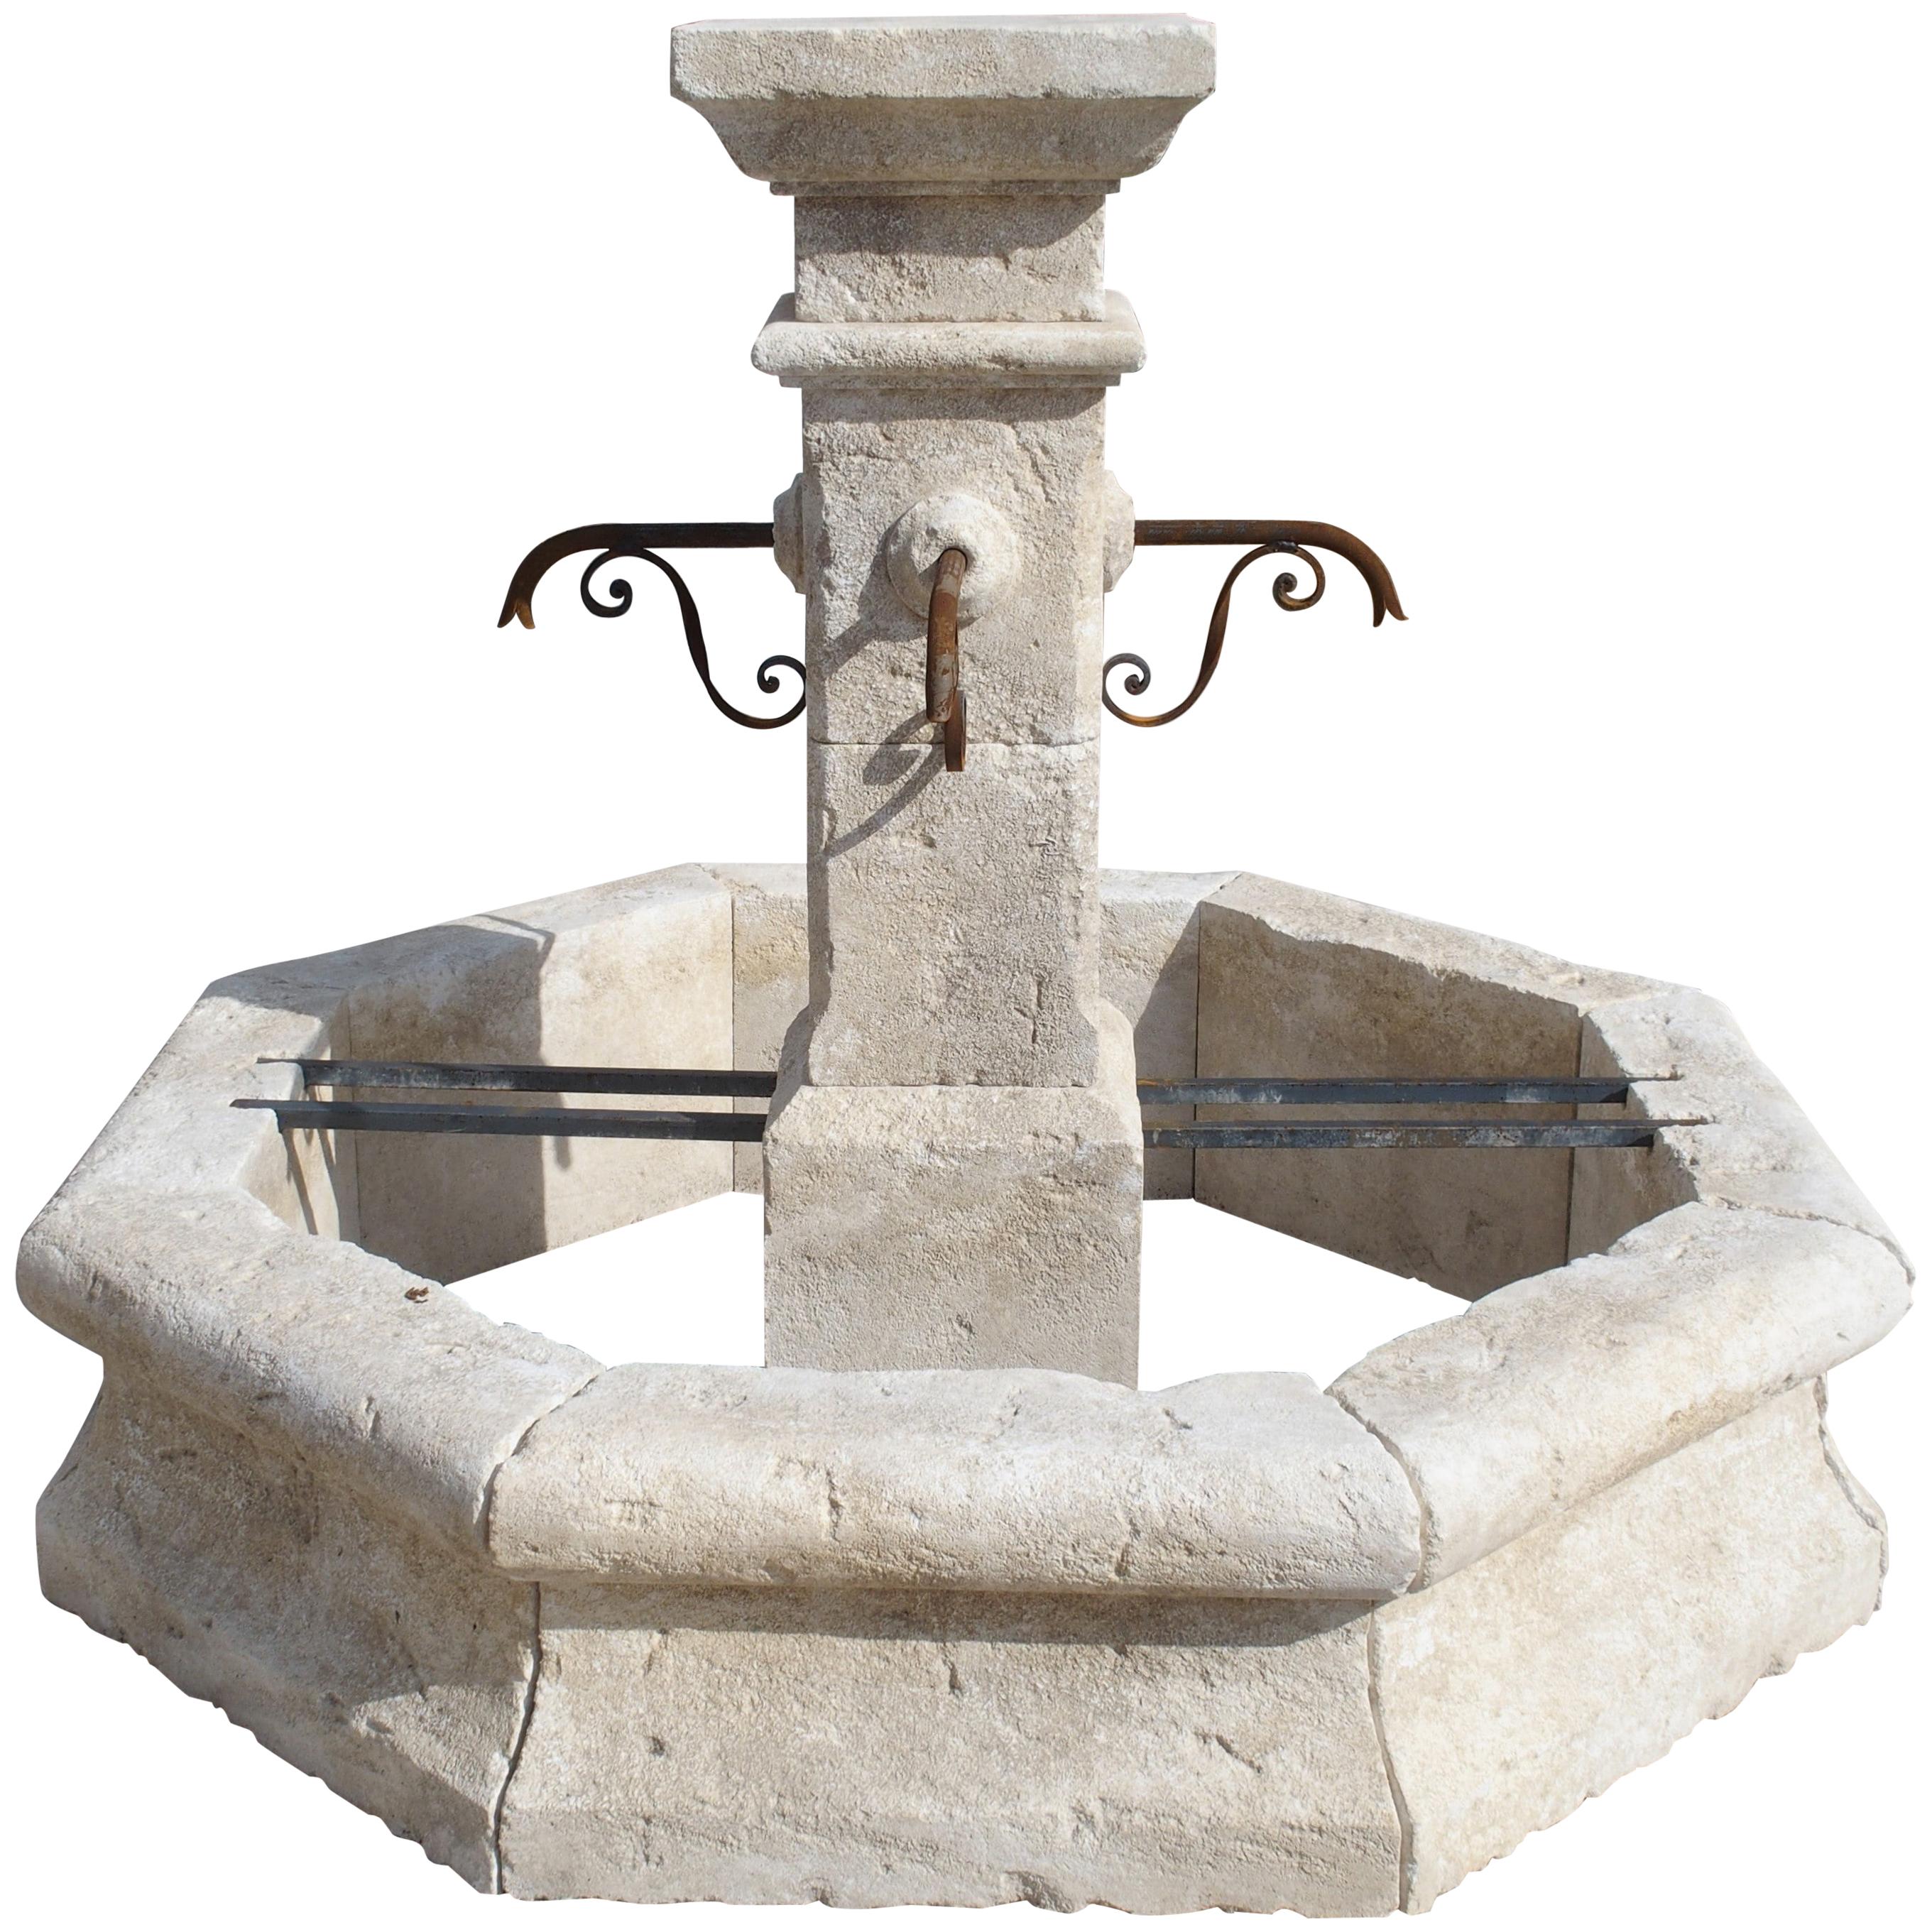 Provencale Center Fountain with Octagonal Basin and Square Center Column